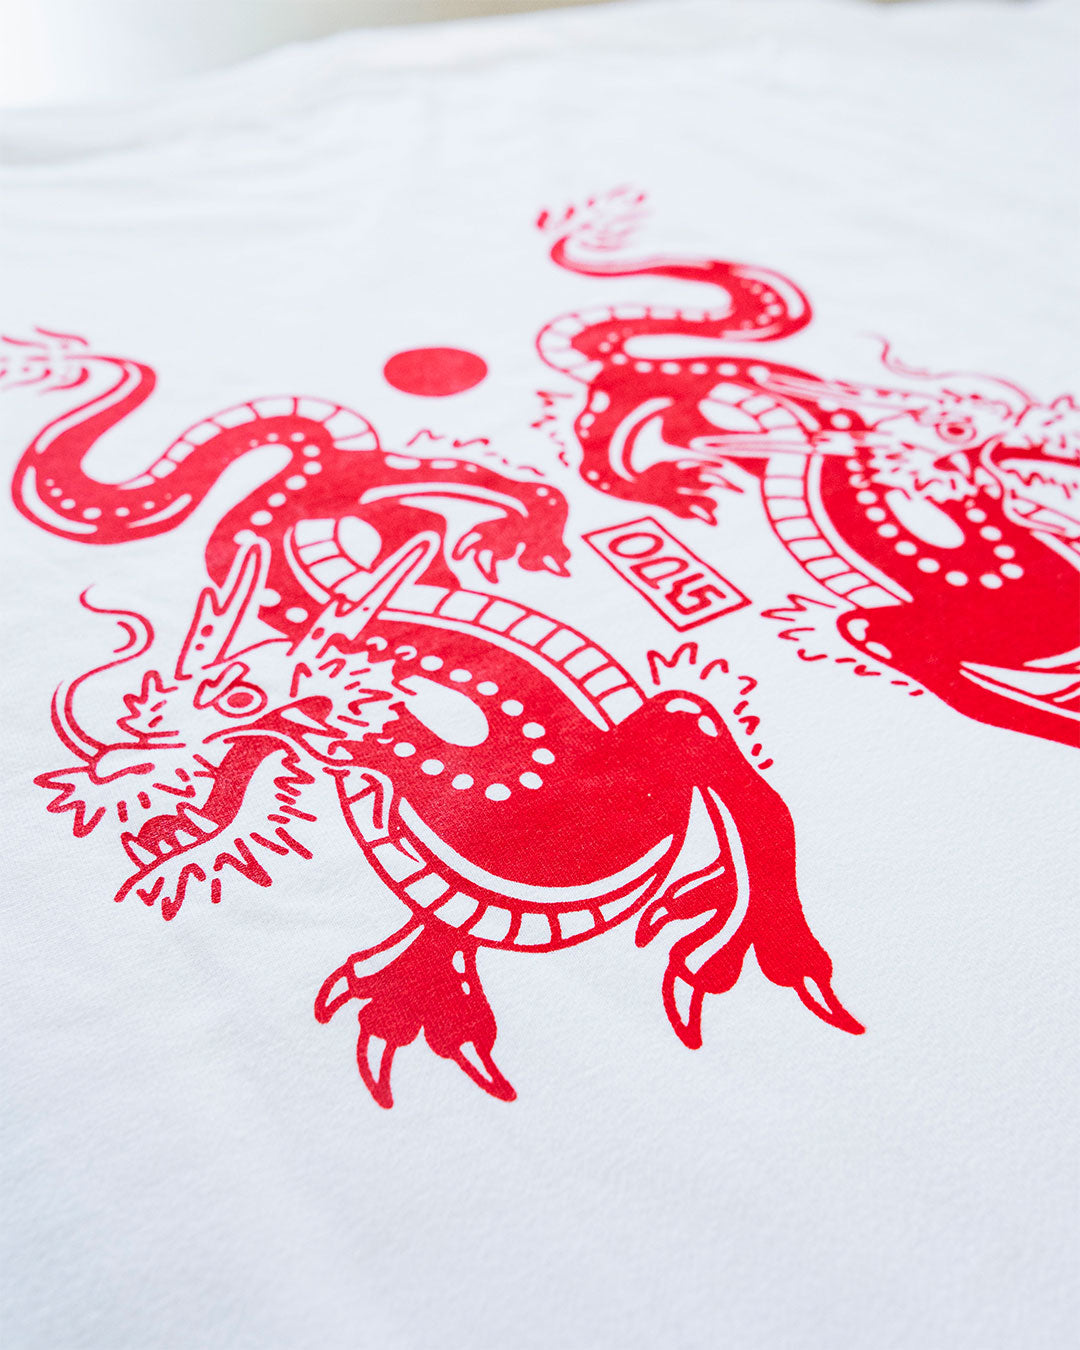 Year of The Dragon Tee in White